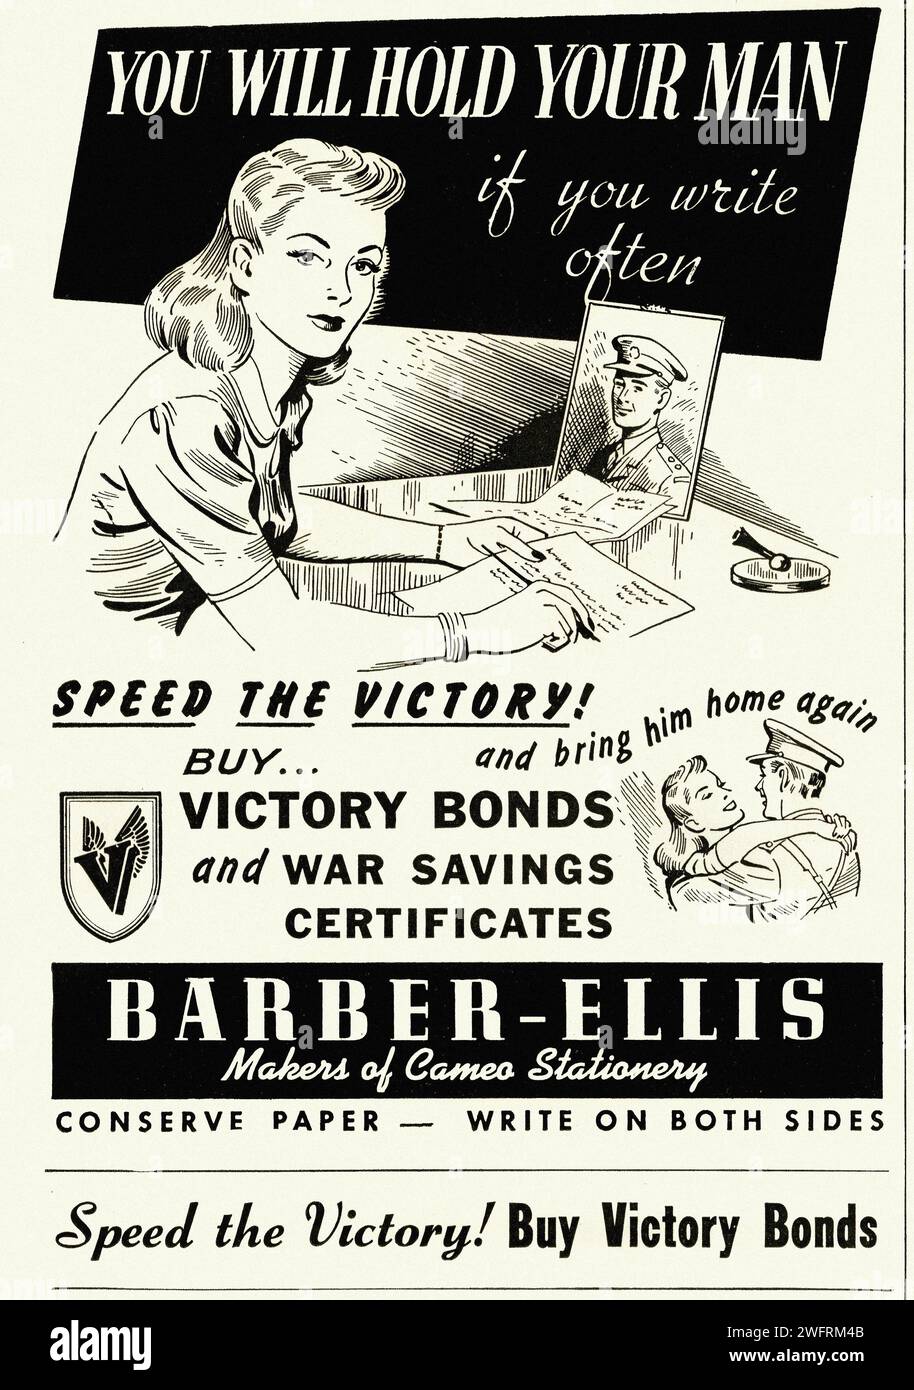 “YOU WILL HOLD YOUR MAN IF YOU WRITE OFTEN”  “An American World War II advertisement poster for Victory Bonds and War Savings Certificates. The black and white poster features a woman, engrossed in writing a letter, with a blurred image of a man in the background. The graphic style of the poster is reminiscent of the mid-20th century, with its bold typography and illustrative imagery. The bottom of the poster encourages conservation with the phrase ‘Conserve paper - write on both sides’ and promotes Barber-Ellis, makers of cameo stationery.” - American (U.S.) advertising, World War II era Stock Photo